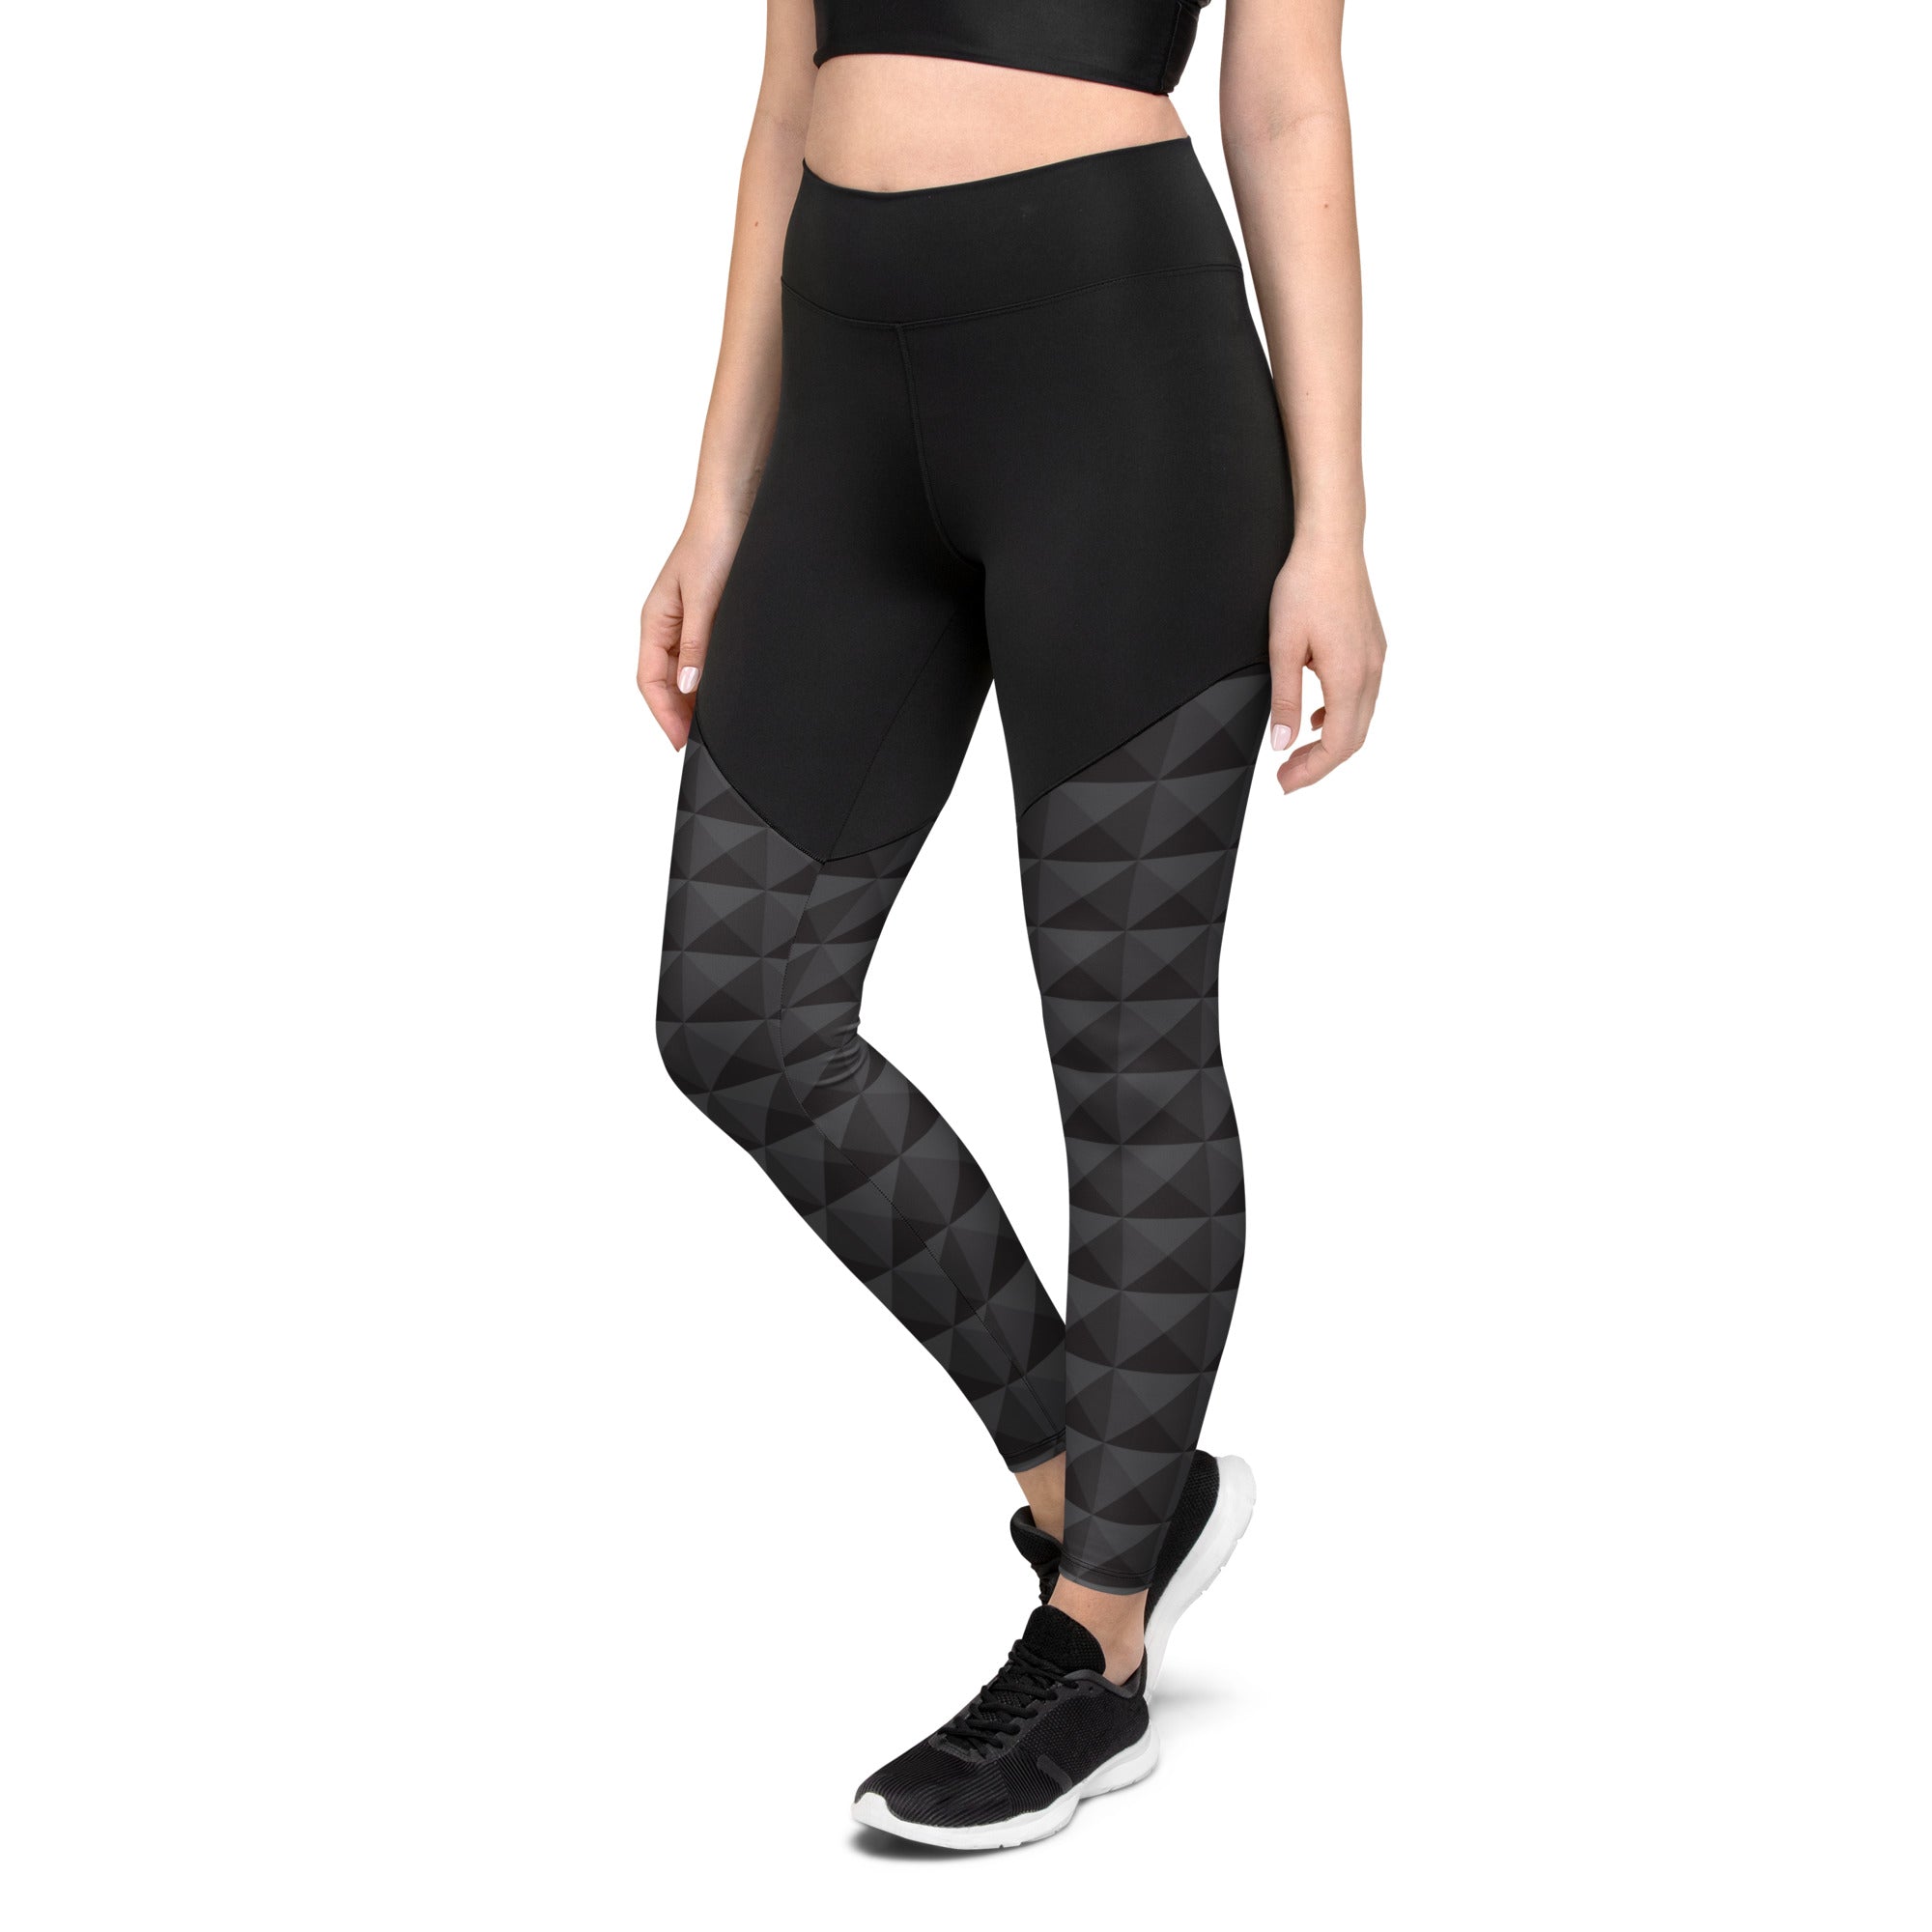 Seamless Cube Pattern Compression Leggings